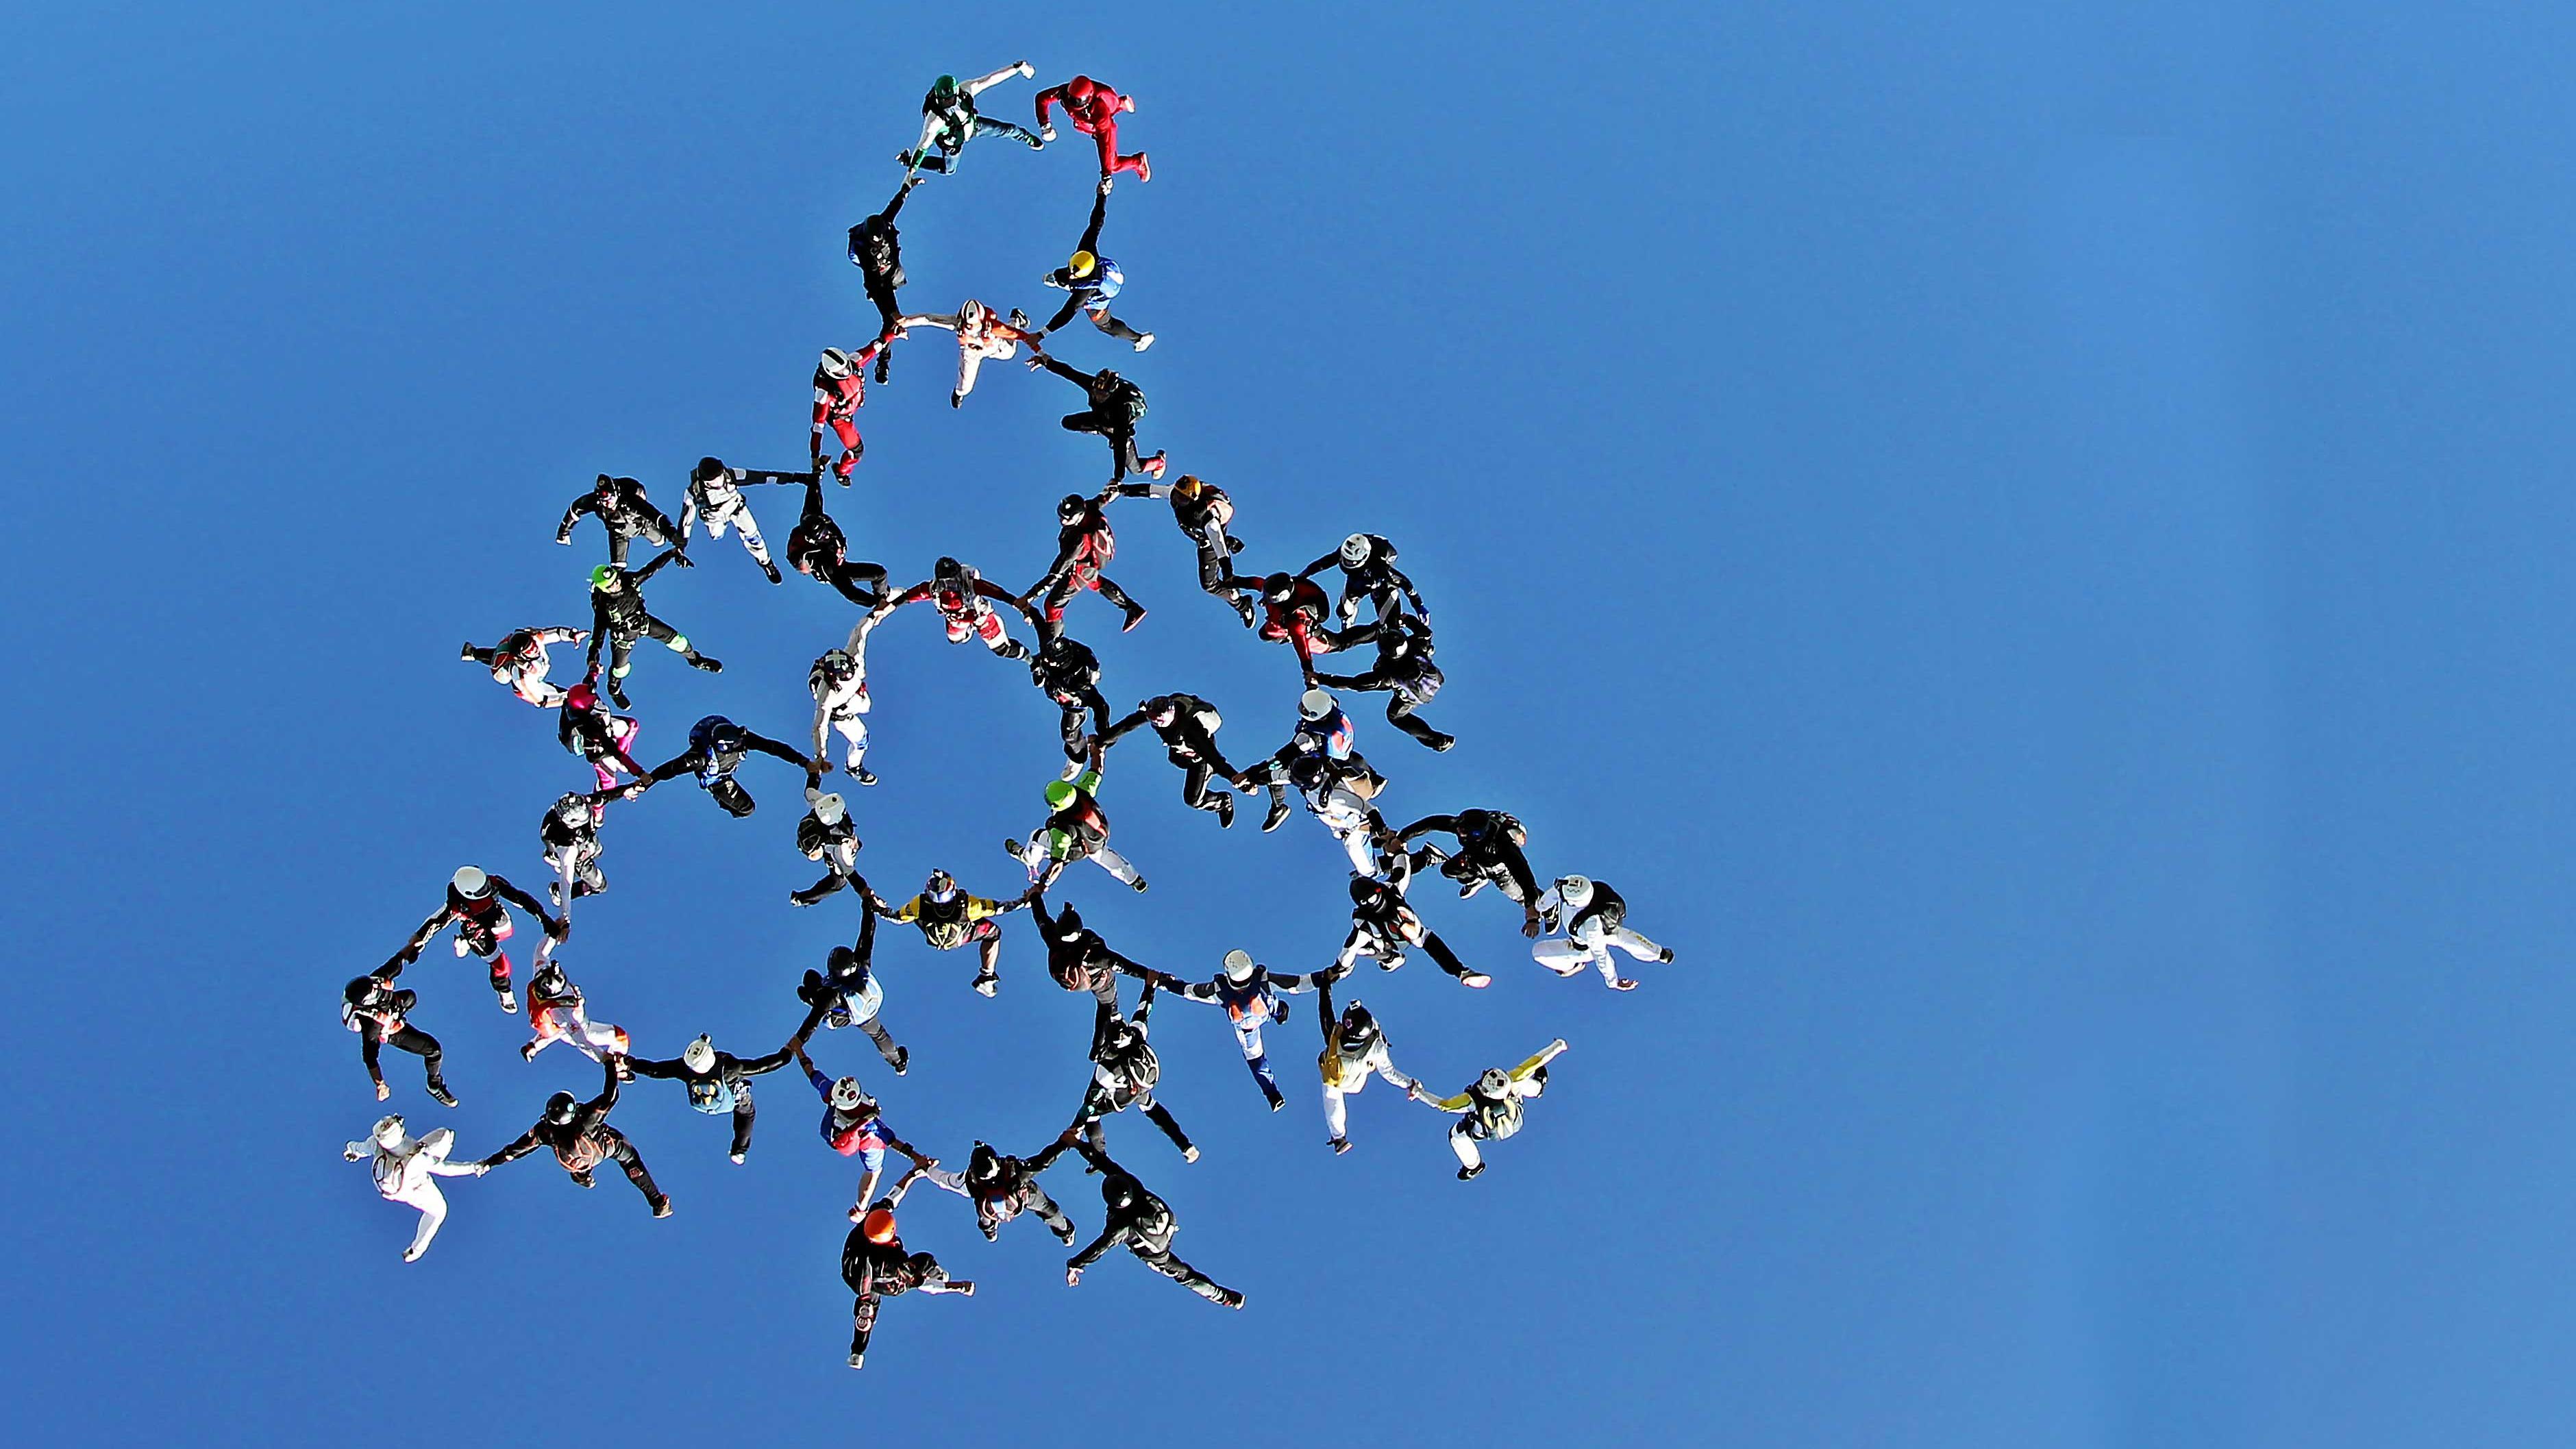 Sports Skydiving 3760x2115